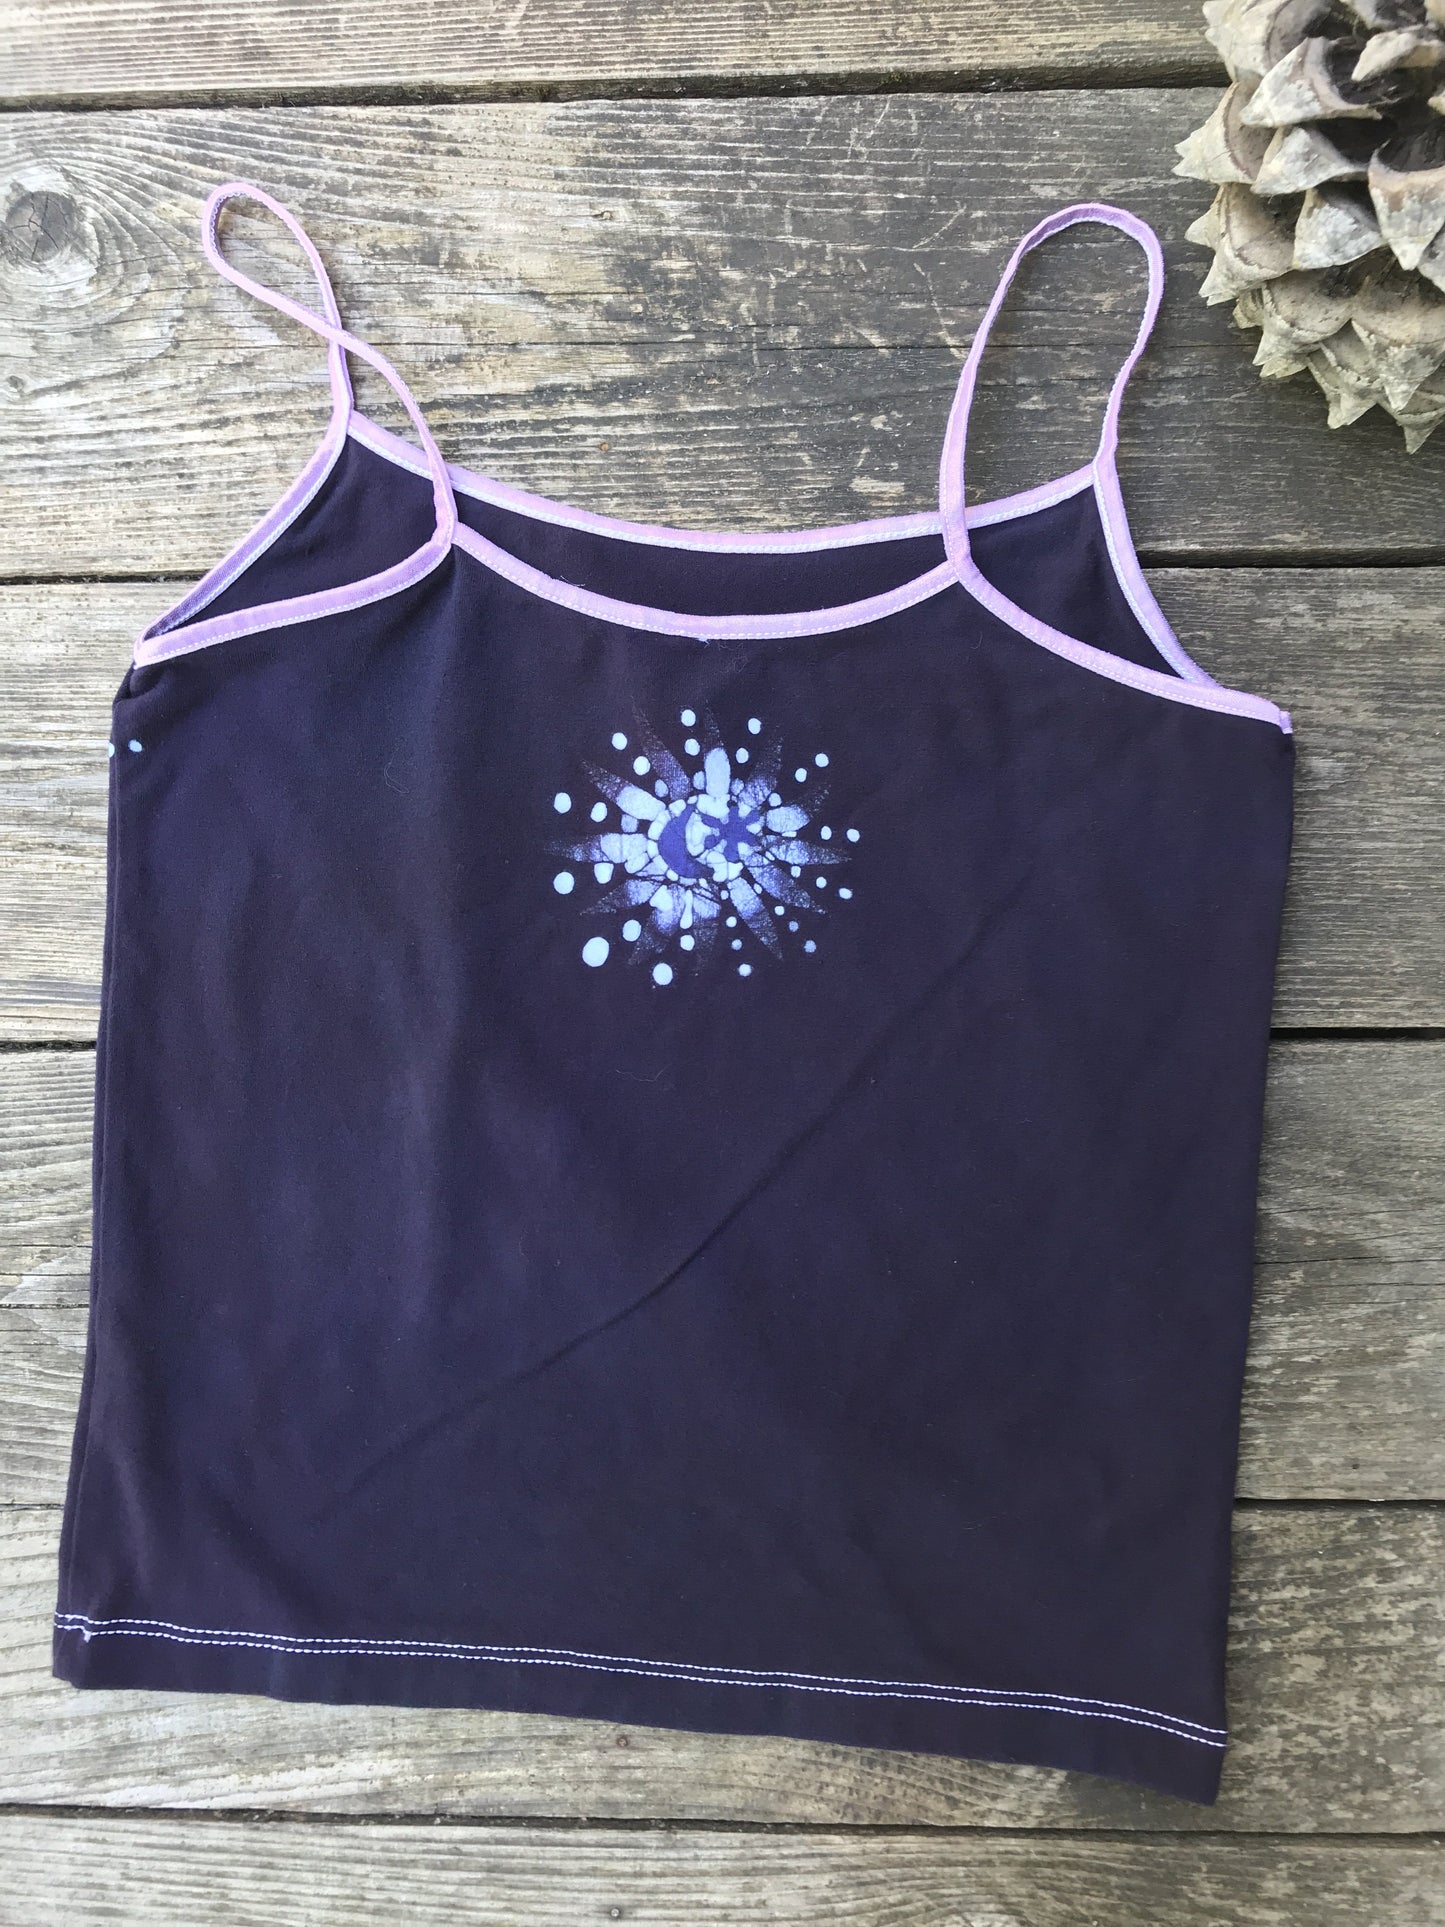 Midnight Moon Across The Sky Green Batik Stretchy Handmade Yoga Camisole - Size M ONLY